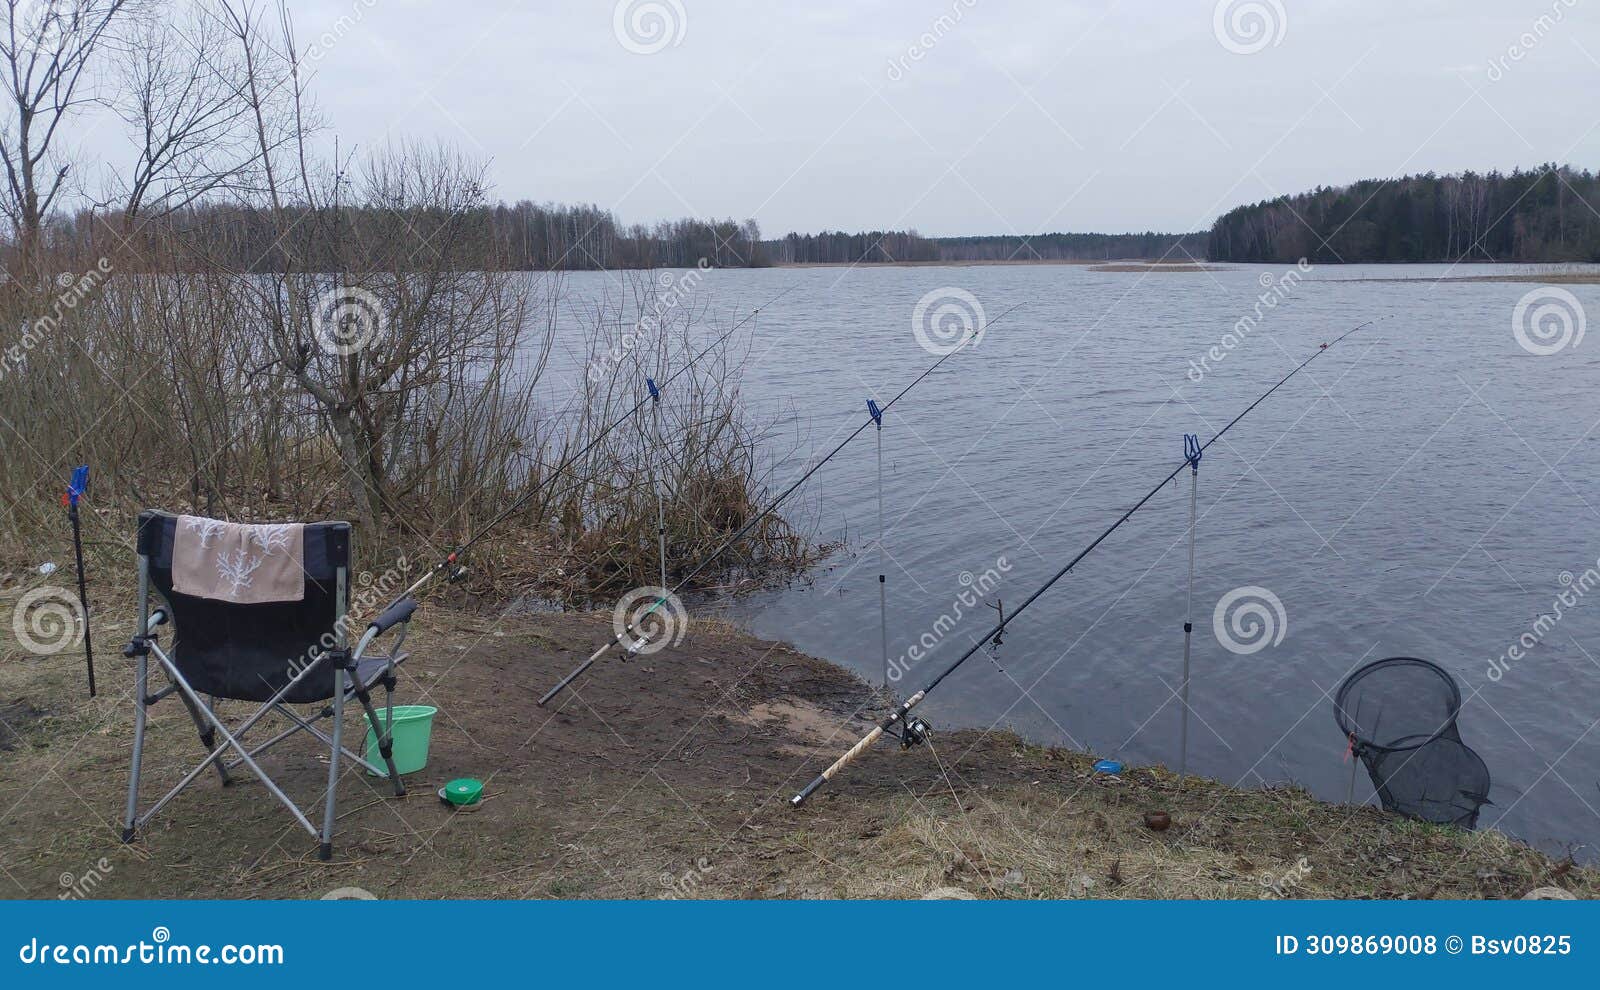 https://thumbs.dreamstime.com/z/folding-fishing-chair-plastic-bucket-bait-cage-feeder-rods-bream-fishing-mounted-stands-ground-next-309869008.jpg